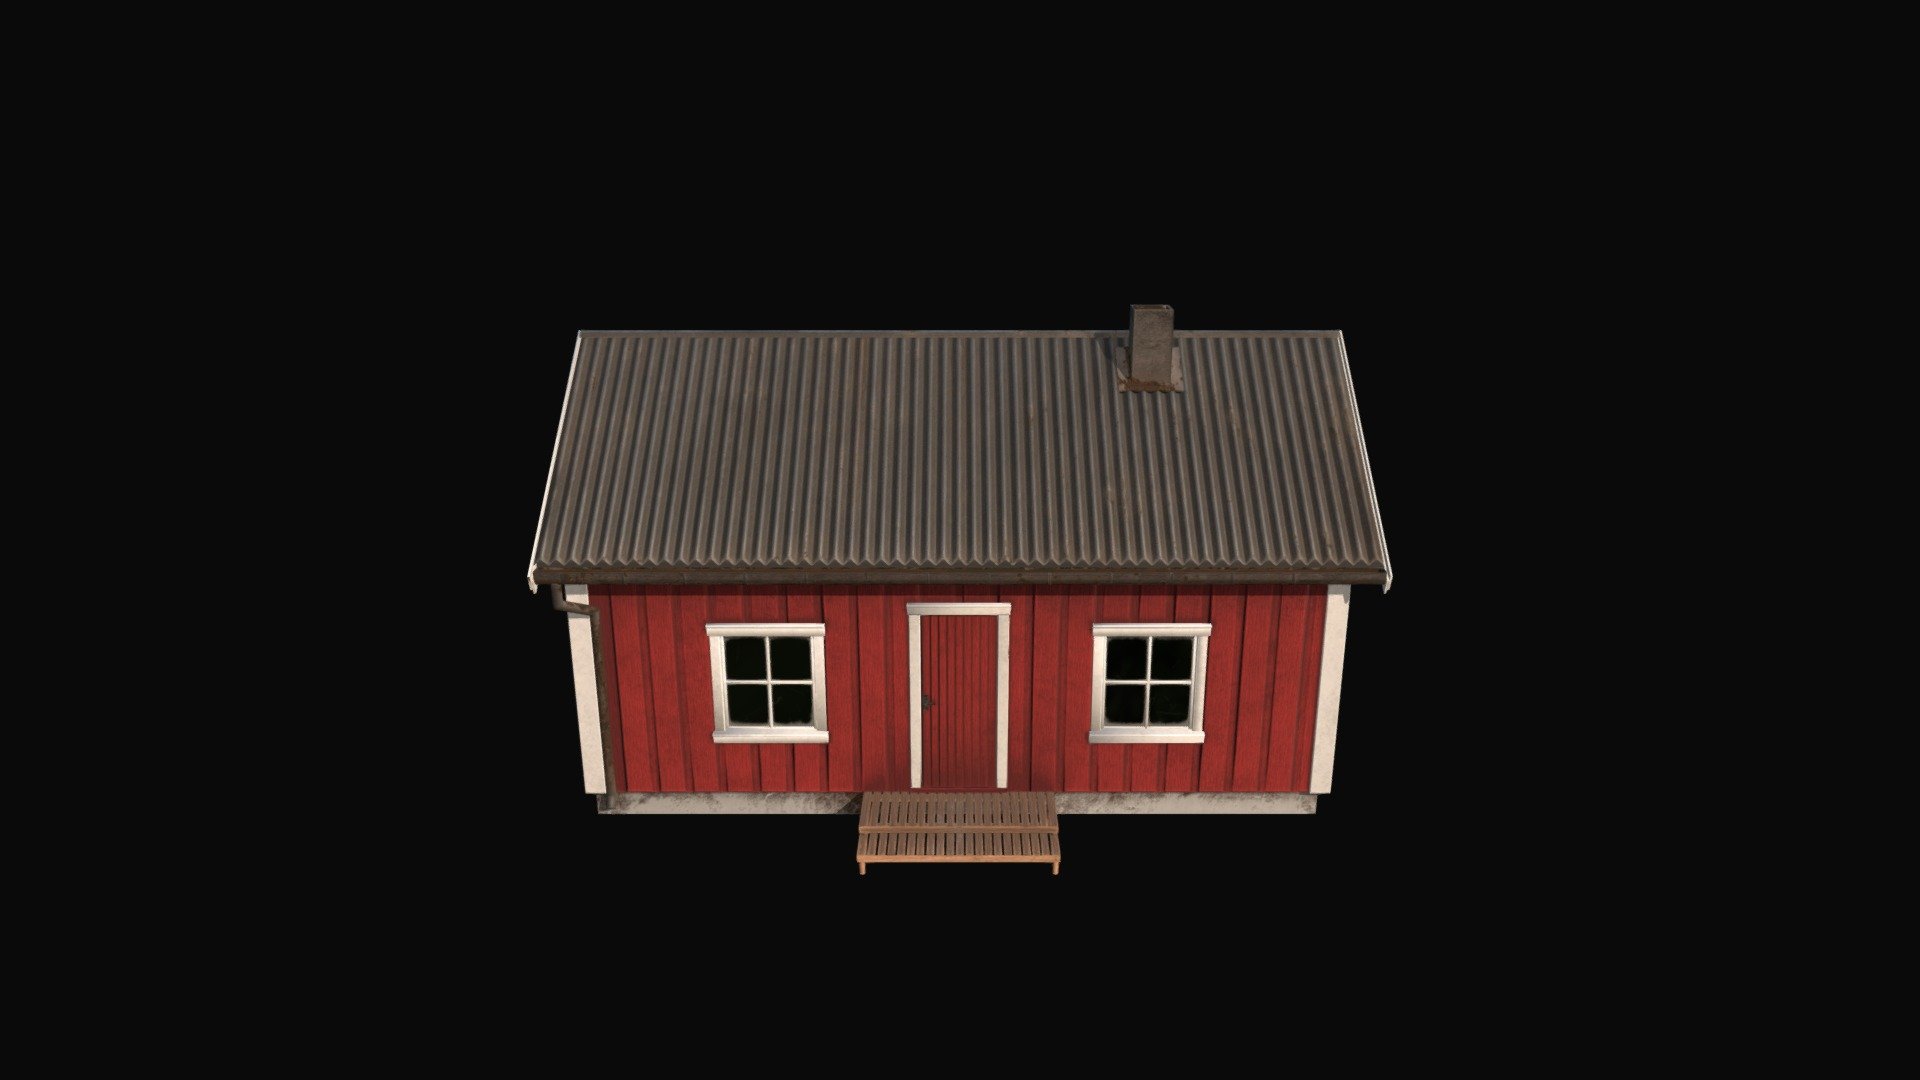 Scandinavian red cabin

PBR Materials with 4k, 2k textures including:

Albedo, Normals, Metalness, Roughness

triangles: 20060
vertices: 19367

Formats included: FBX, OBJ - old cabin - Buy Royalty Free 3D model by kmsh 3d model